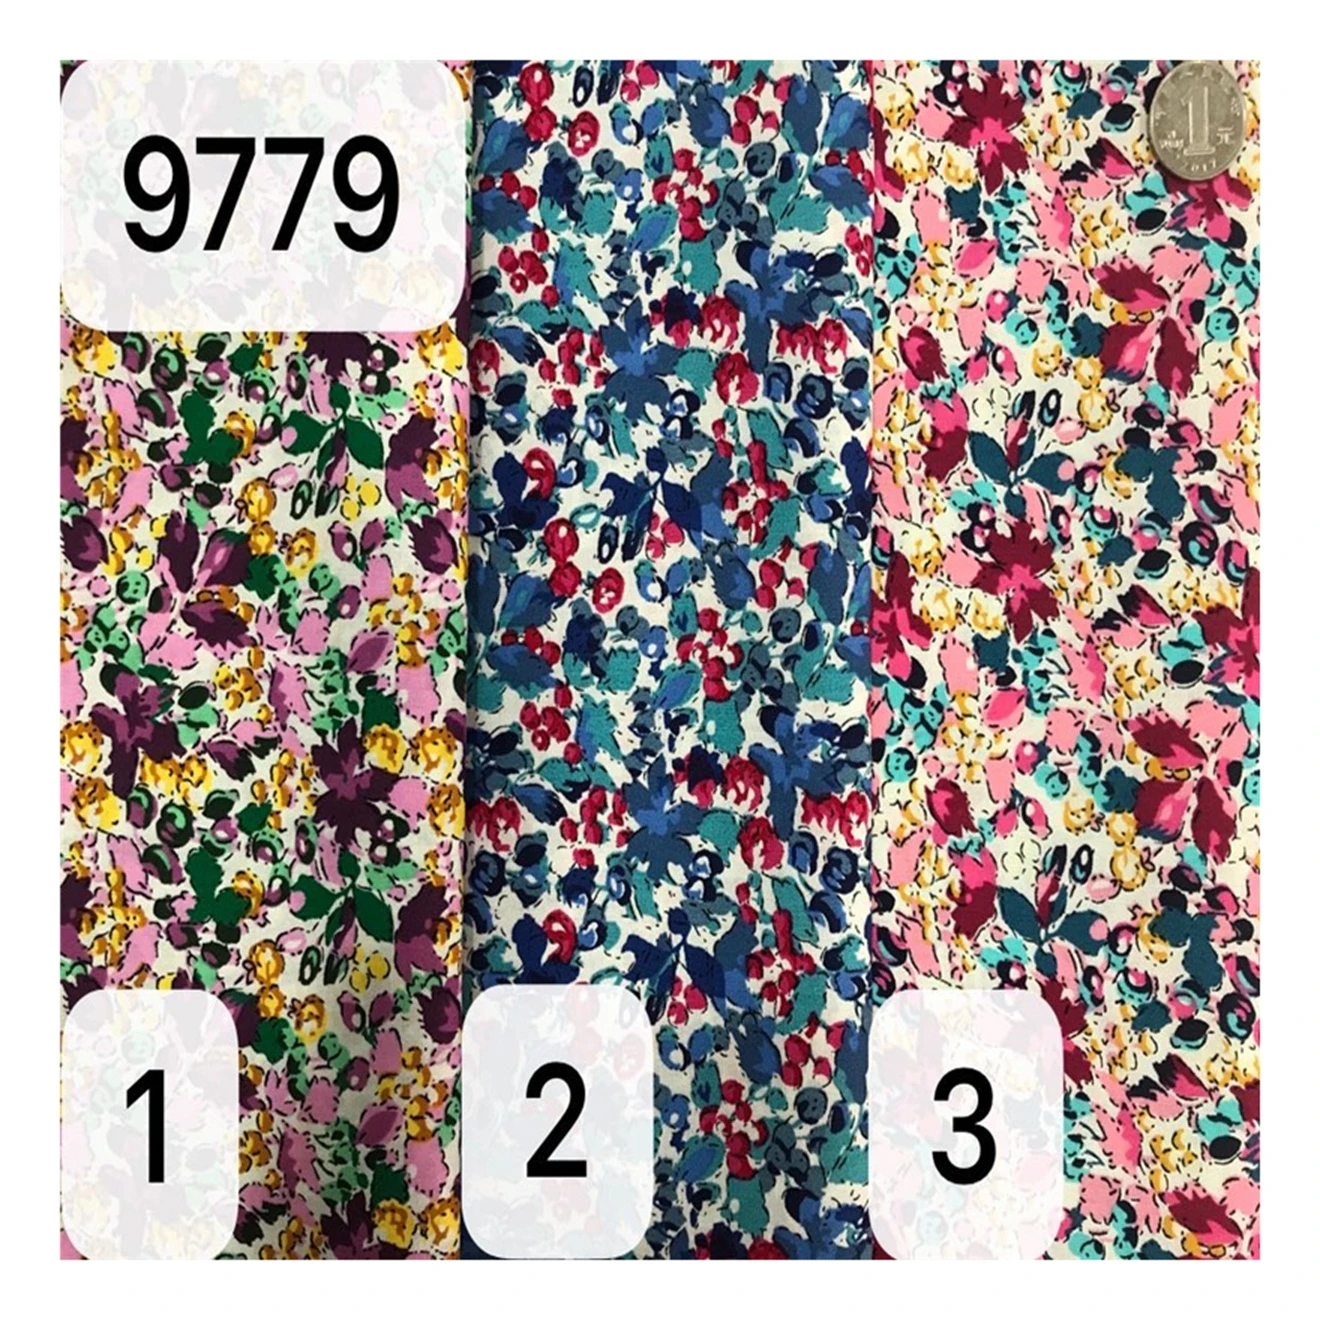 New Arrival Beautiful Colorful Flower 100% Cotton Digital Printed Ready Woven 40s*40s Poplin Textiles Fabric